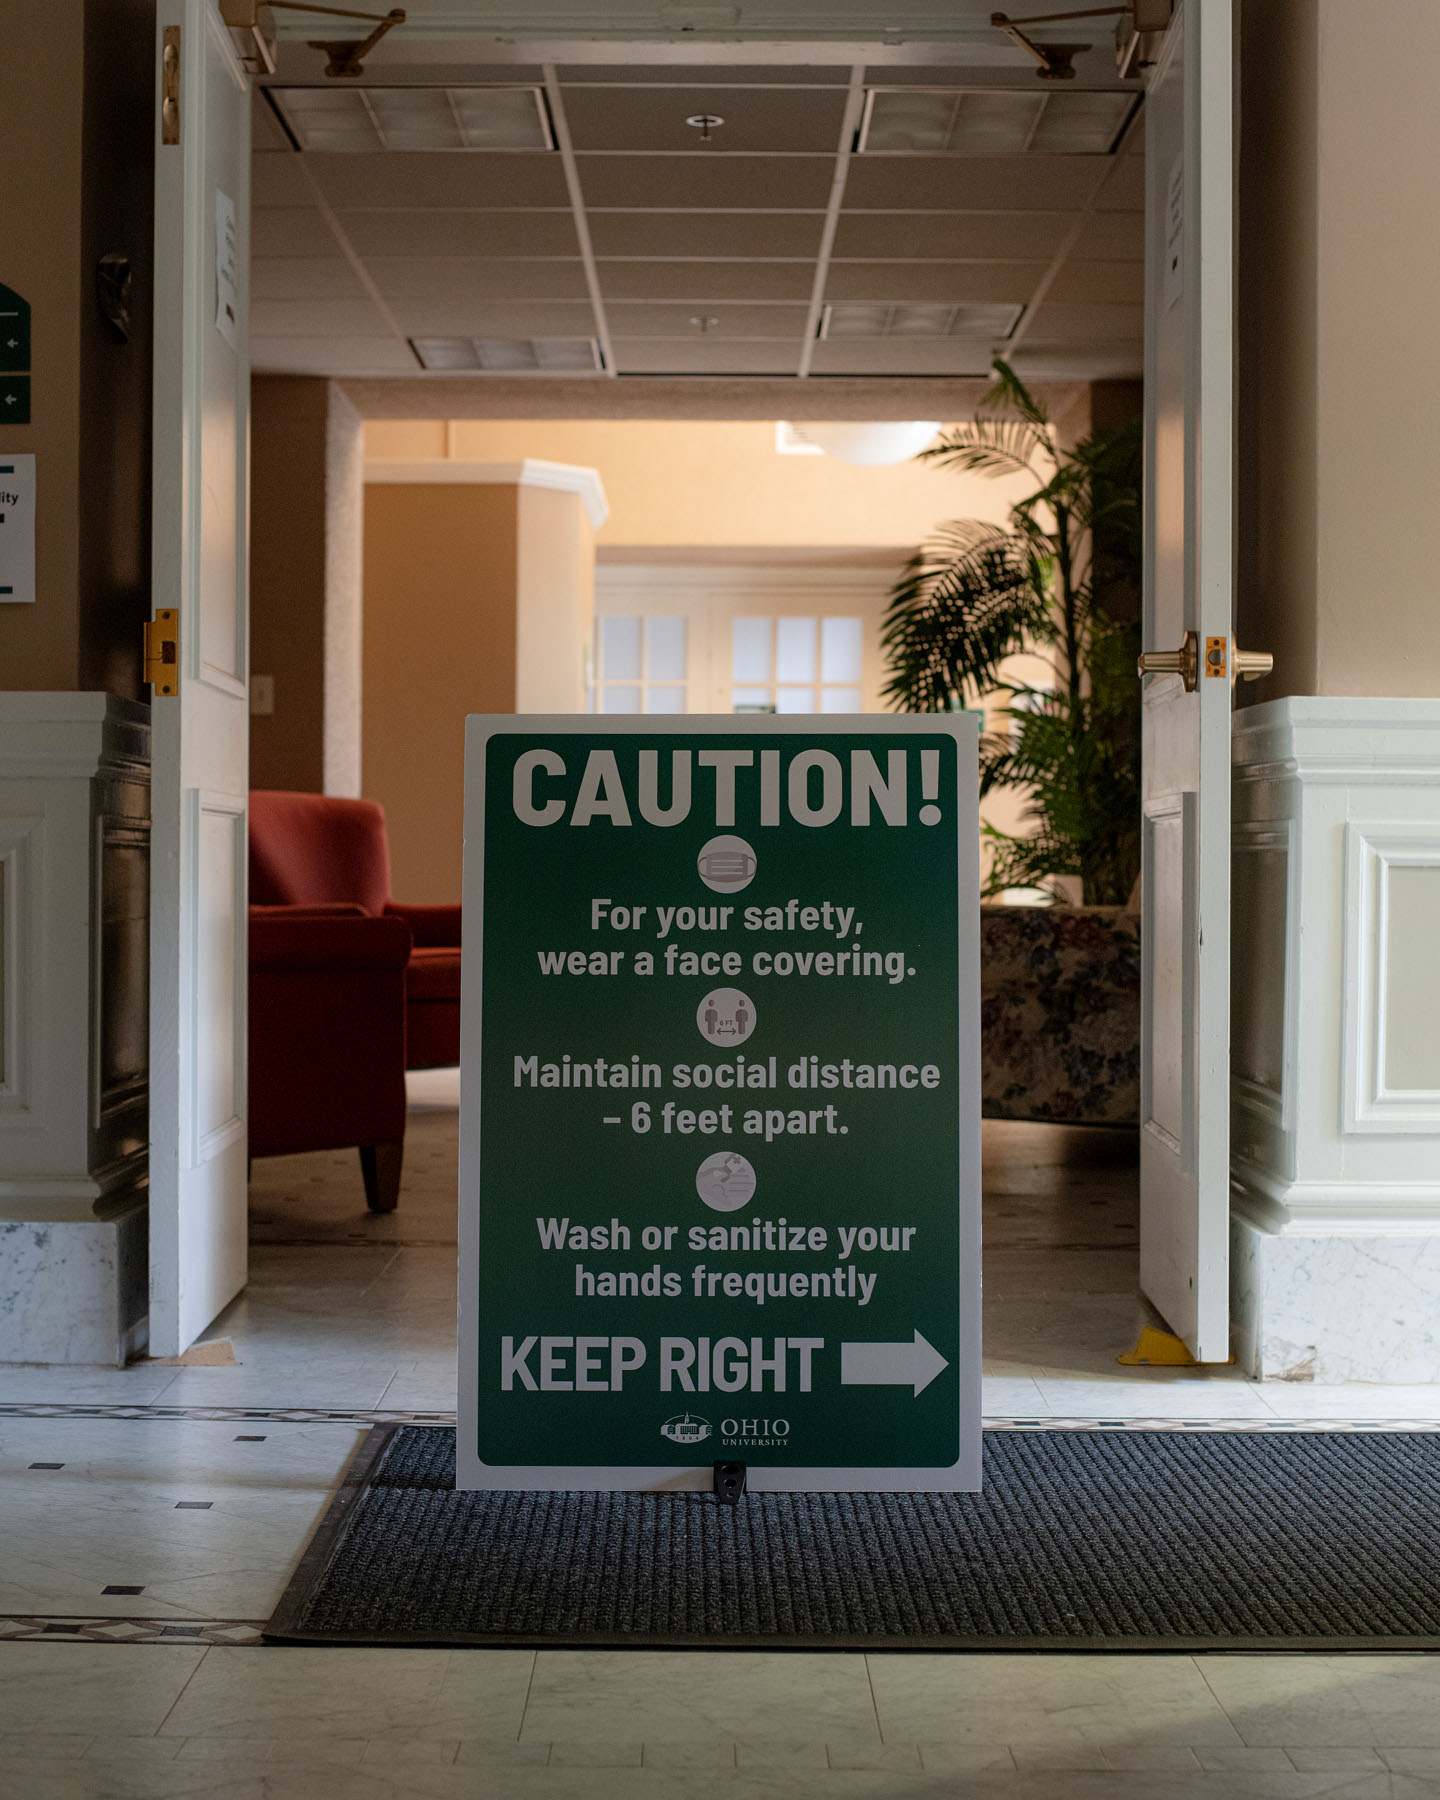 A sign found in an Ohio University administrative buildng mandating conduct